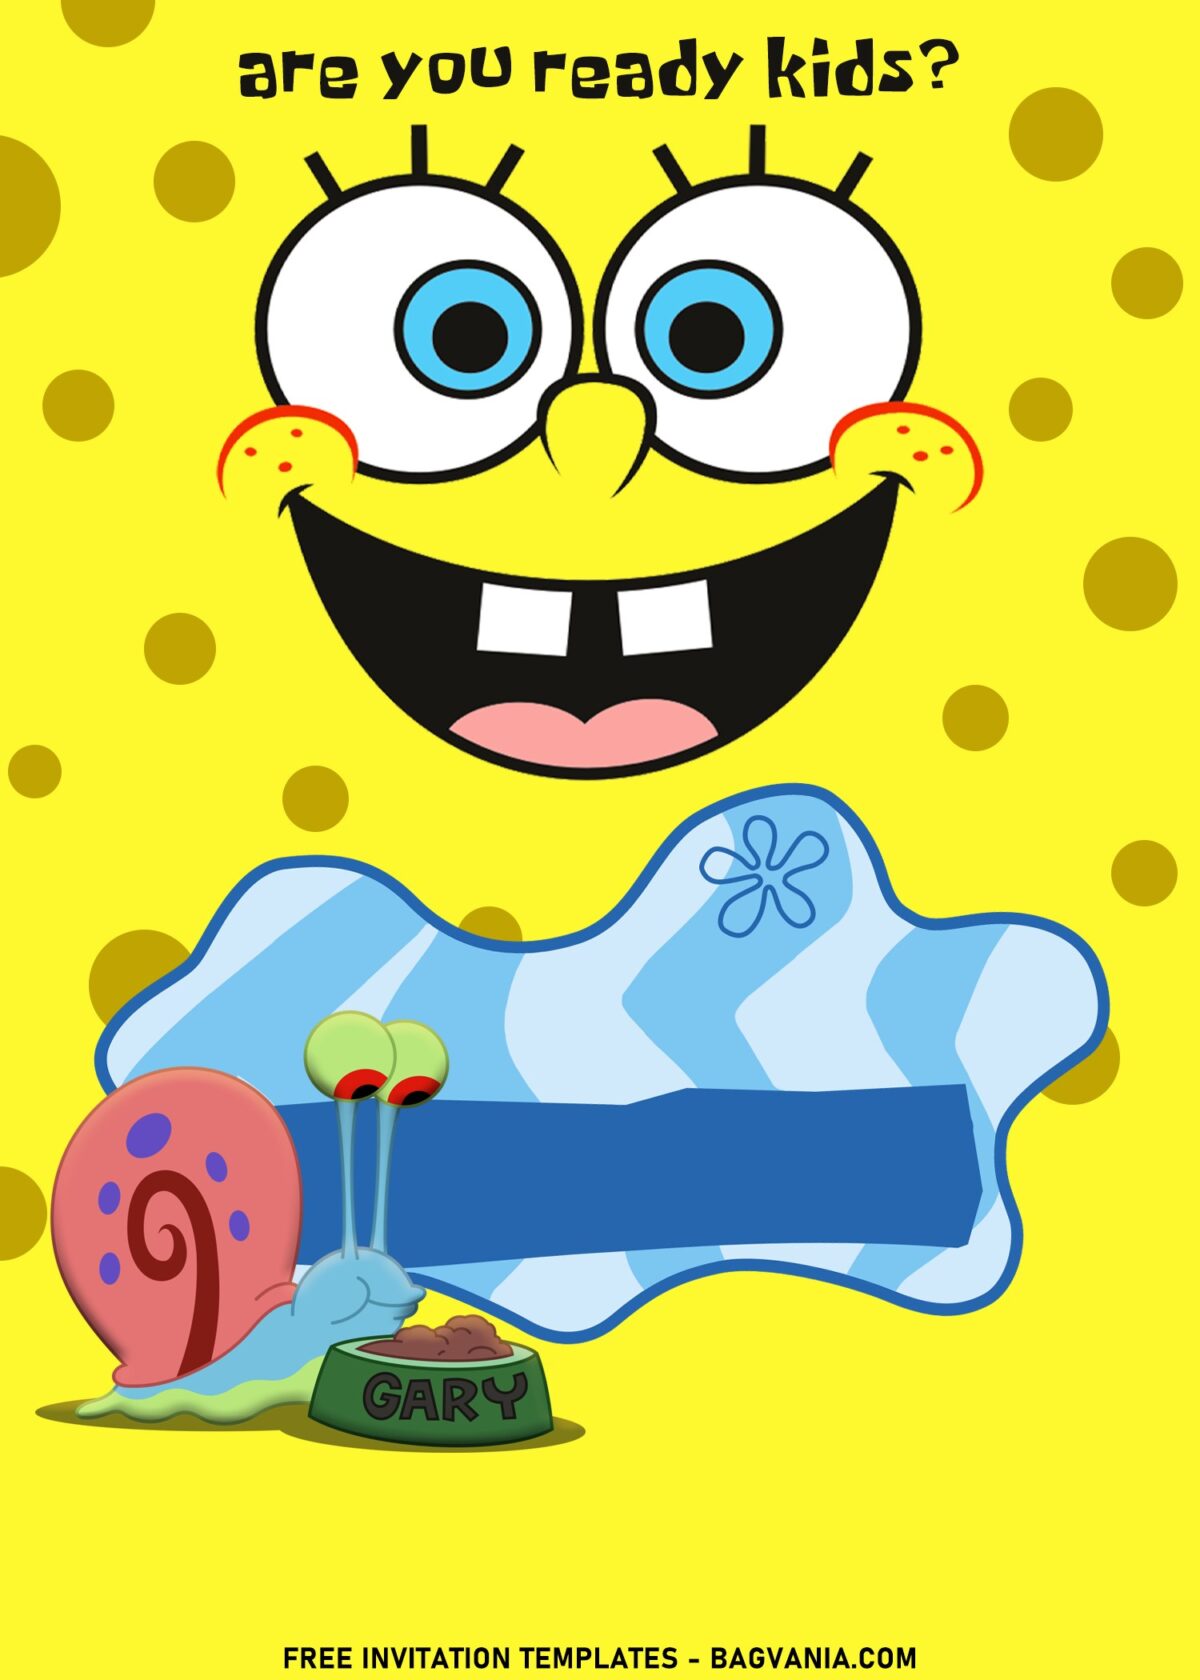 11+ Bright And Colorful SpongeBob Birthday Invitation Templates with adorable Gary is eating his meal